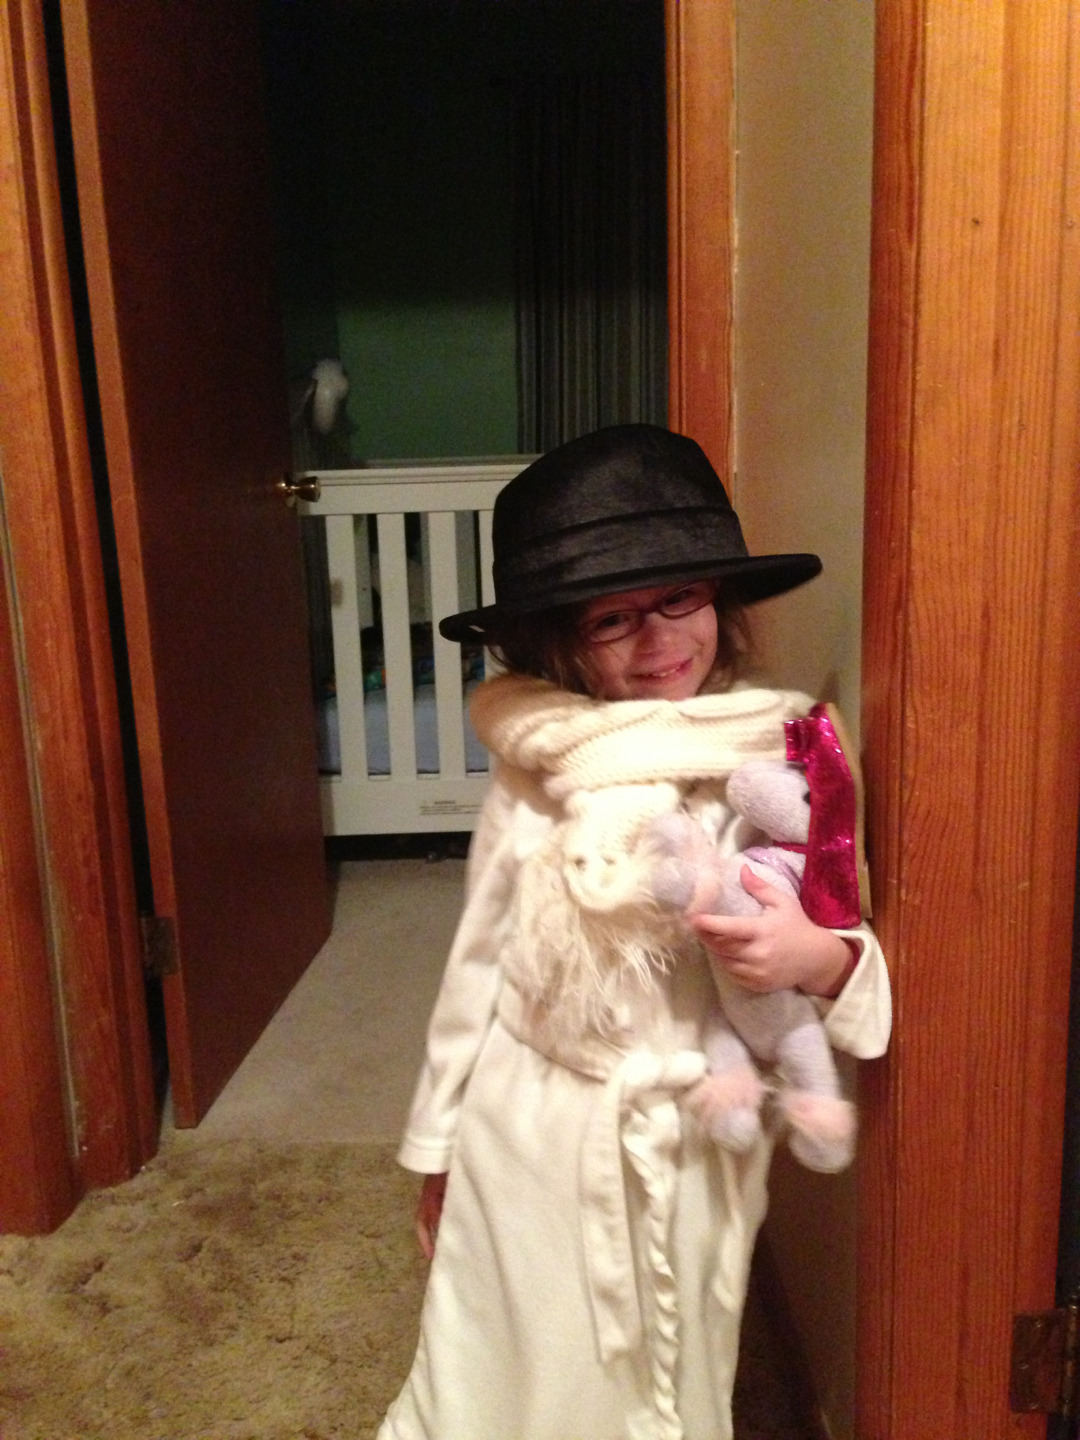 Anna playing spies. She and her stuffed purple pony are in disguise. She was the &#8220;Countess Hoffenfoff,&#8221; and the pony was&#8230;wearing a shoe on its head.